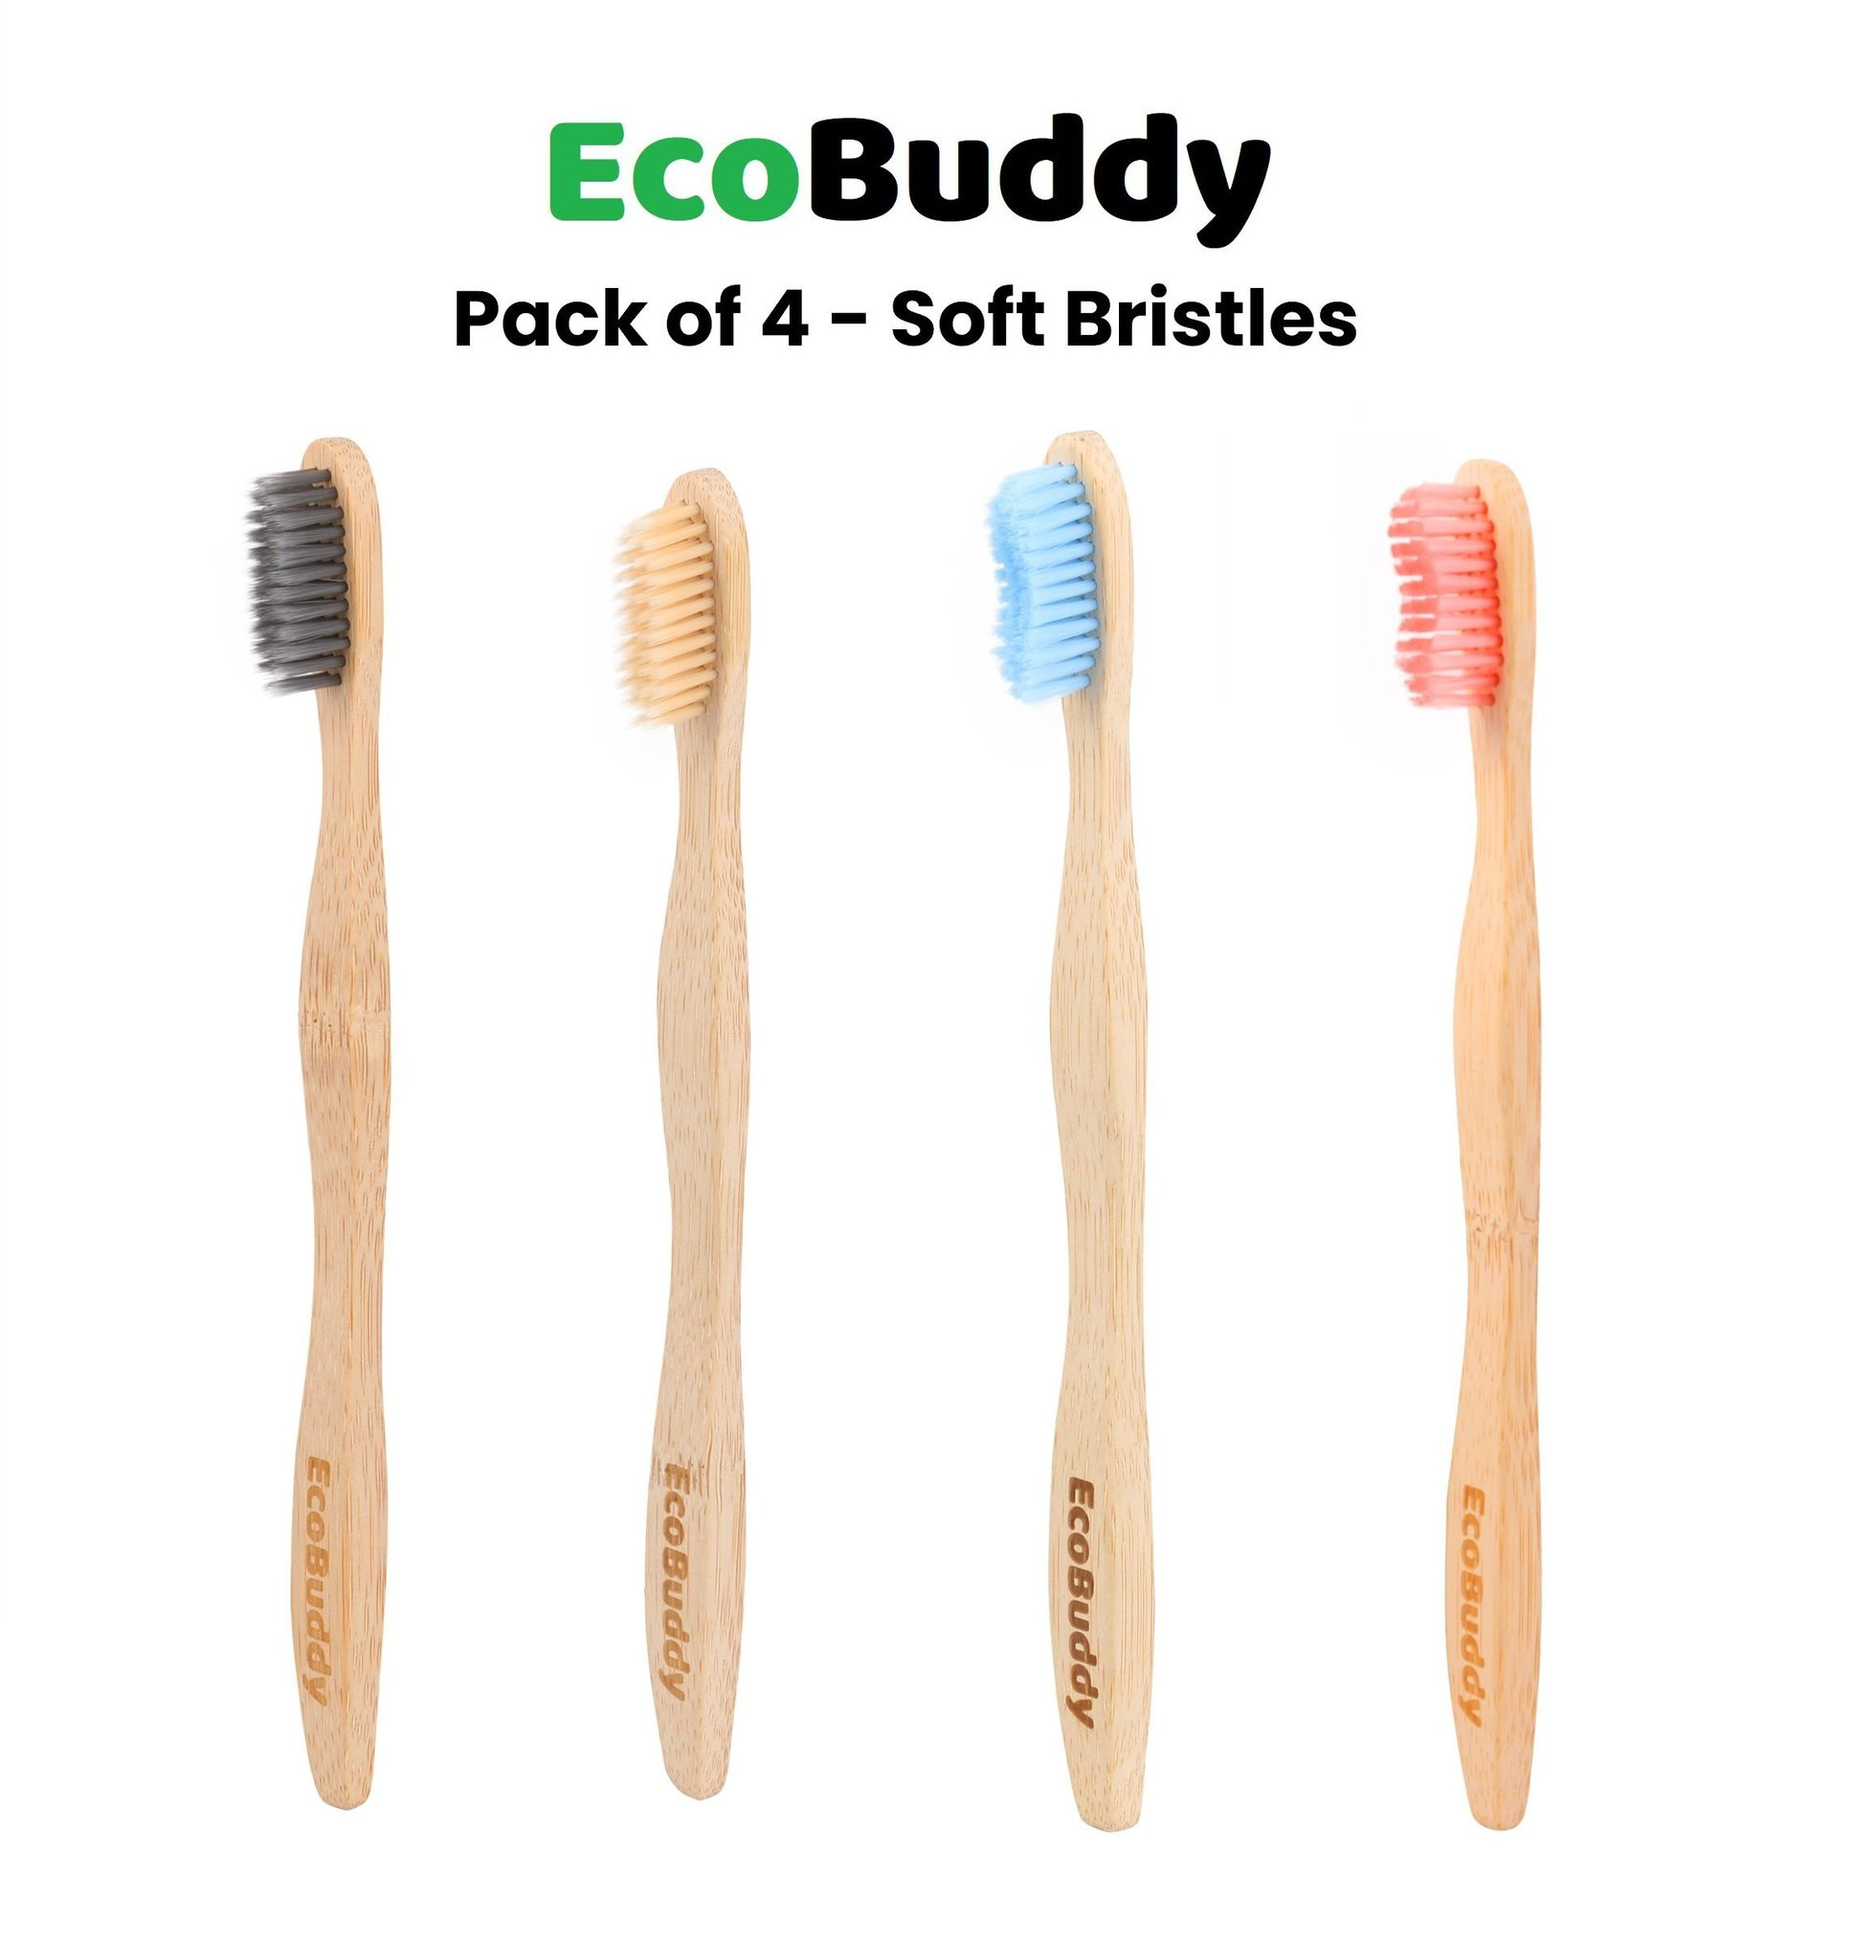 Eco Buddy Soft Bristles Bamboo Toothbrushes- Pack of 4